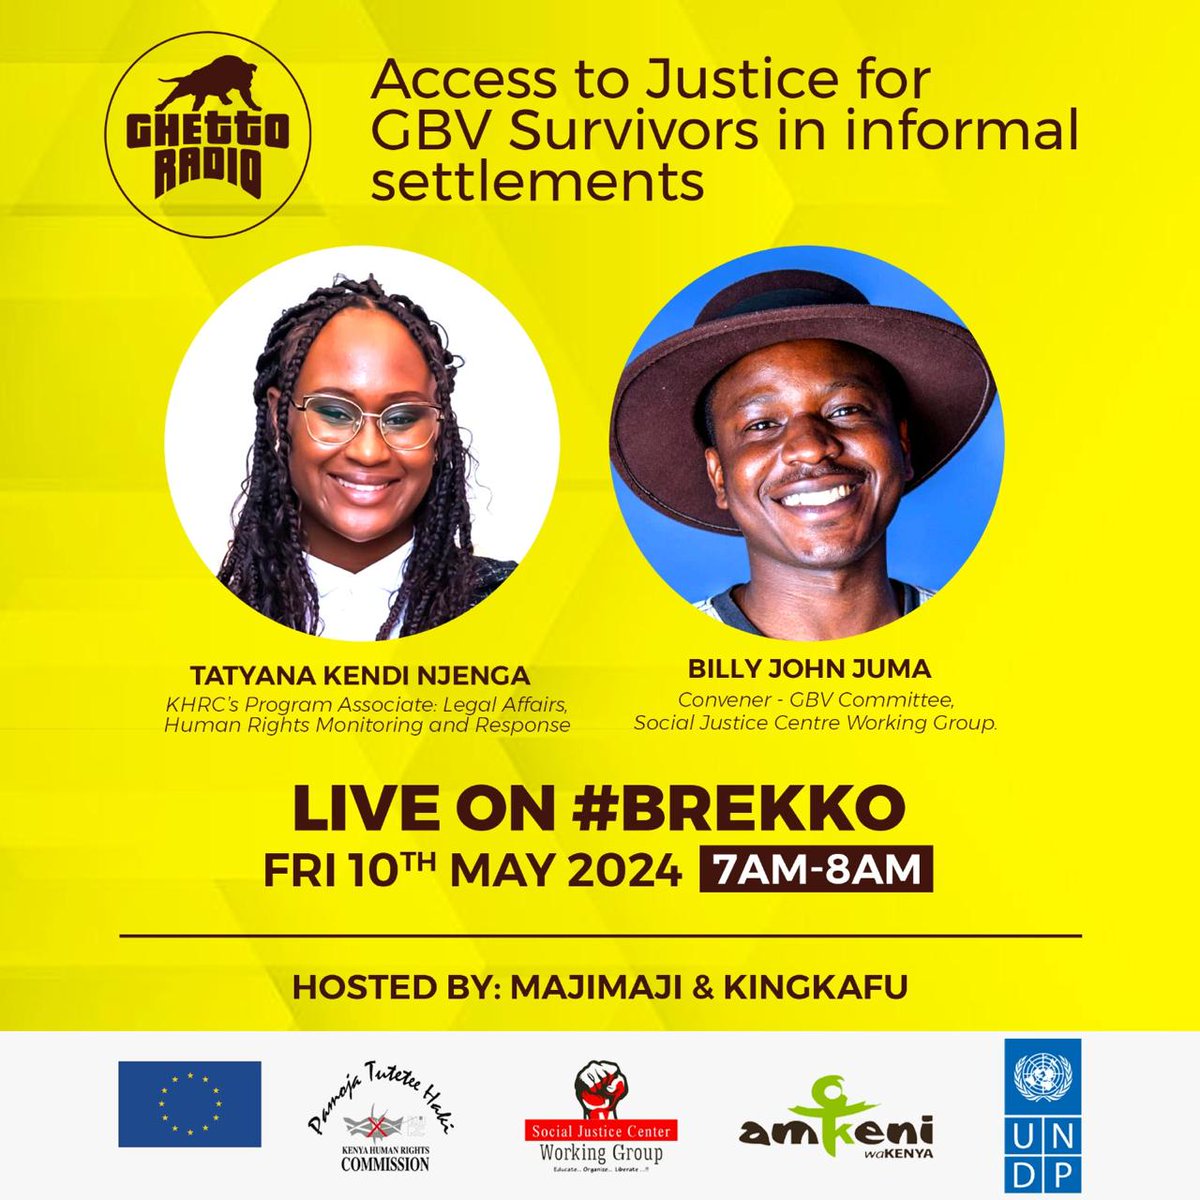 Hey there! Tune in tomorrow morning @GhettoRadio895 Our Convener @bj_254 will be discussing the work we've been doing to ensure access to justice for survivors of GBV in informal settlements Plus, we'll be shedding light on our legal aid clinics happening next week #SGBVDialogues